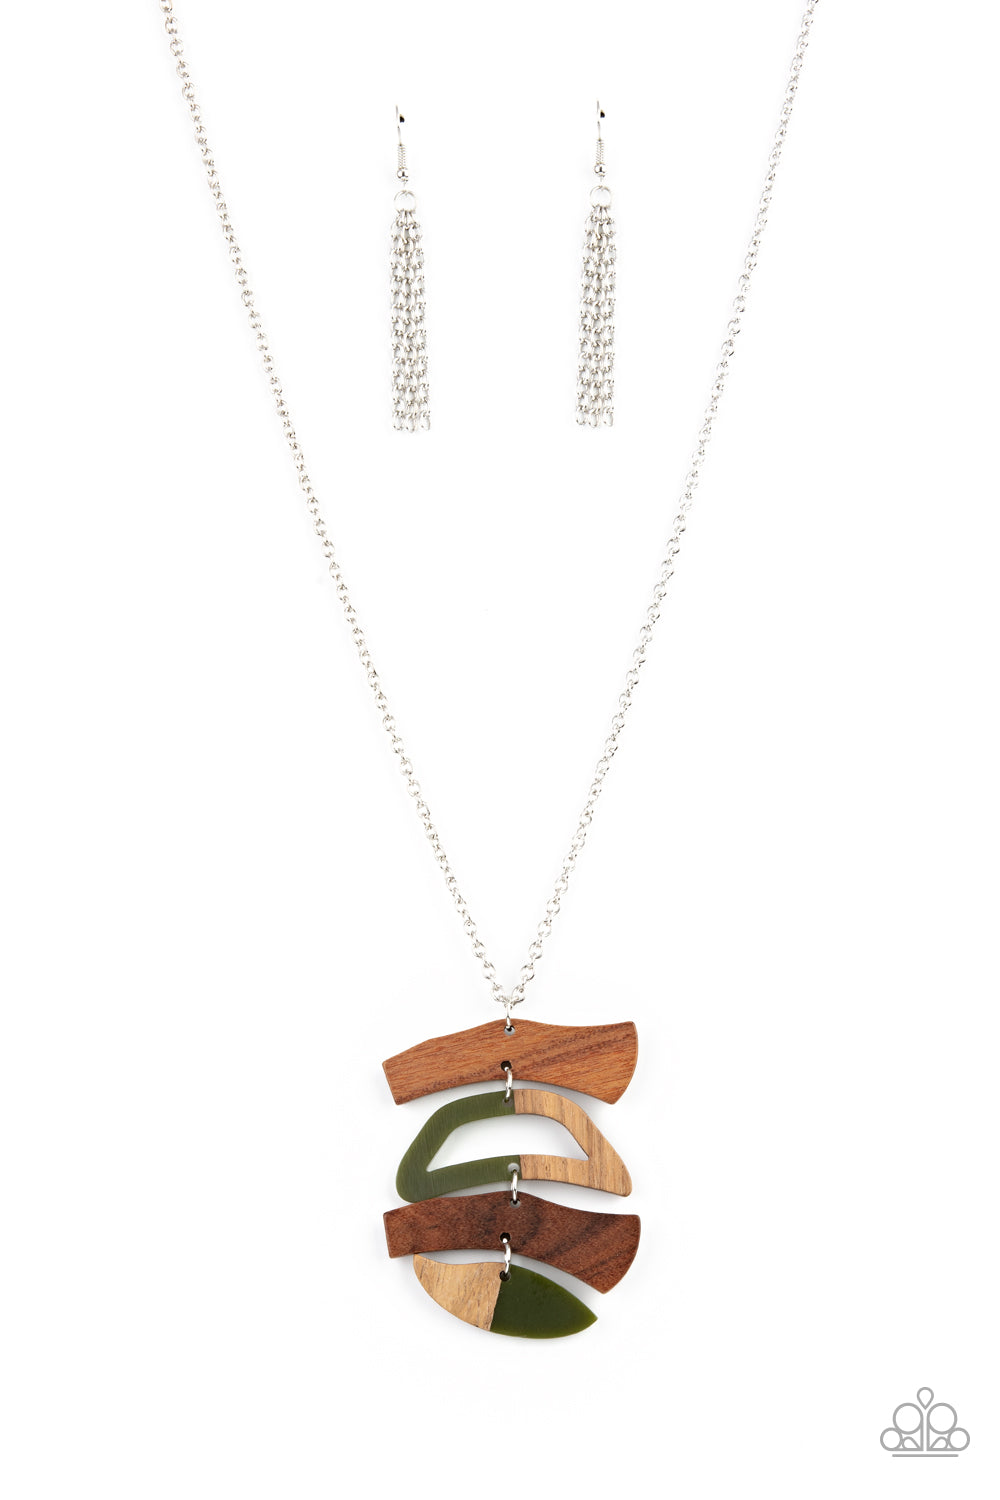 A WOODWORK In Progress - Green - Brown Wood Necklace - Paparazzi Accessories -Featuring green acrylic accents, mismatched wooden frames delicately link into an abstract pendant at the bottom of a lengthened silver chain for an earthy fashion. Features an adjustable clasp closure.